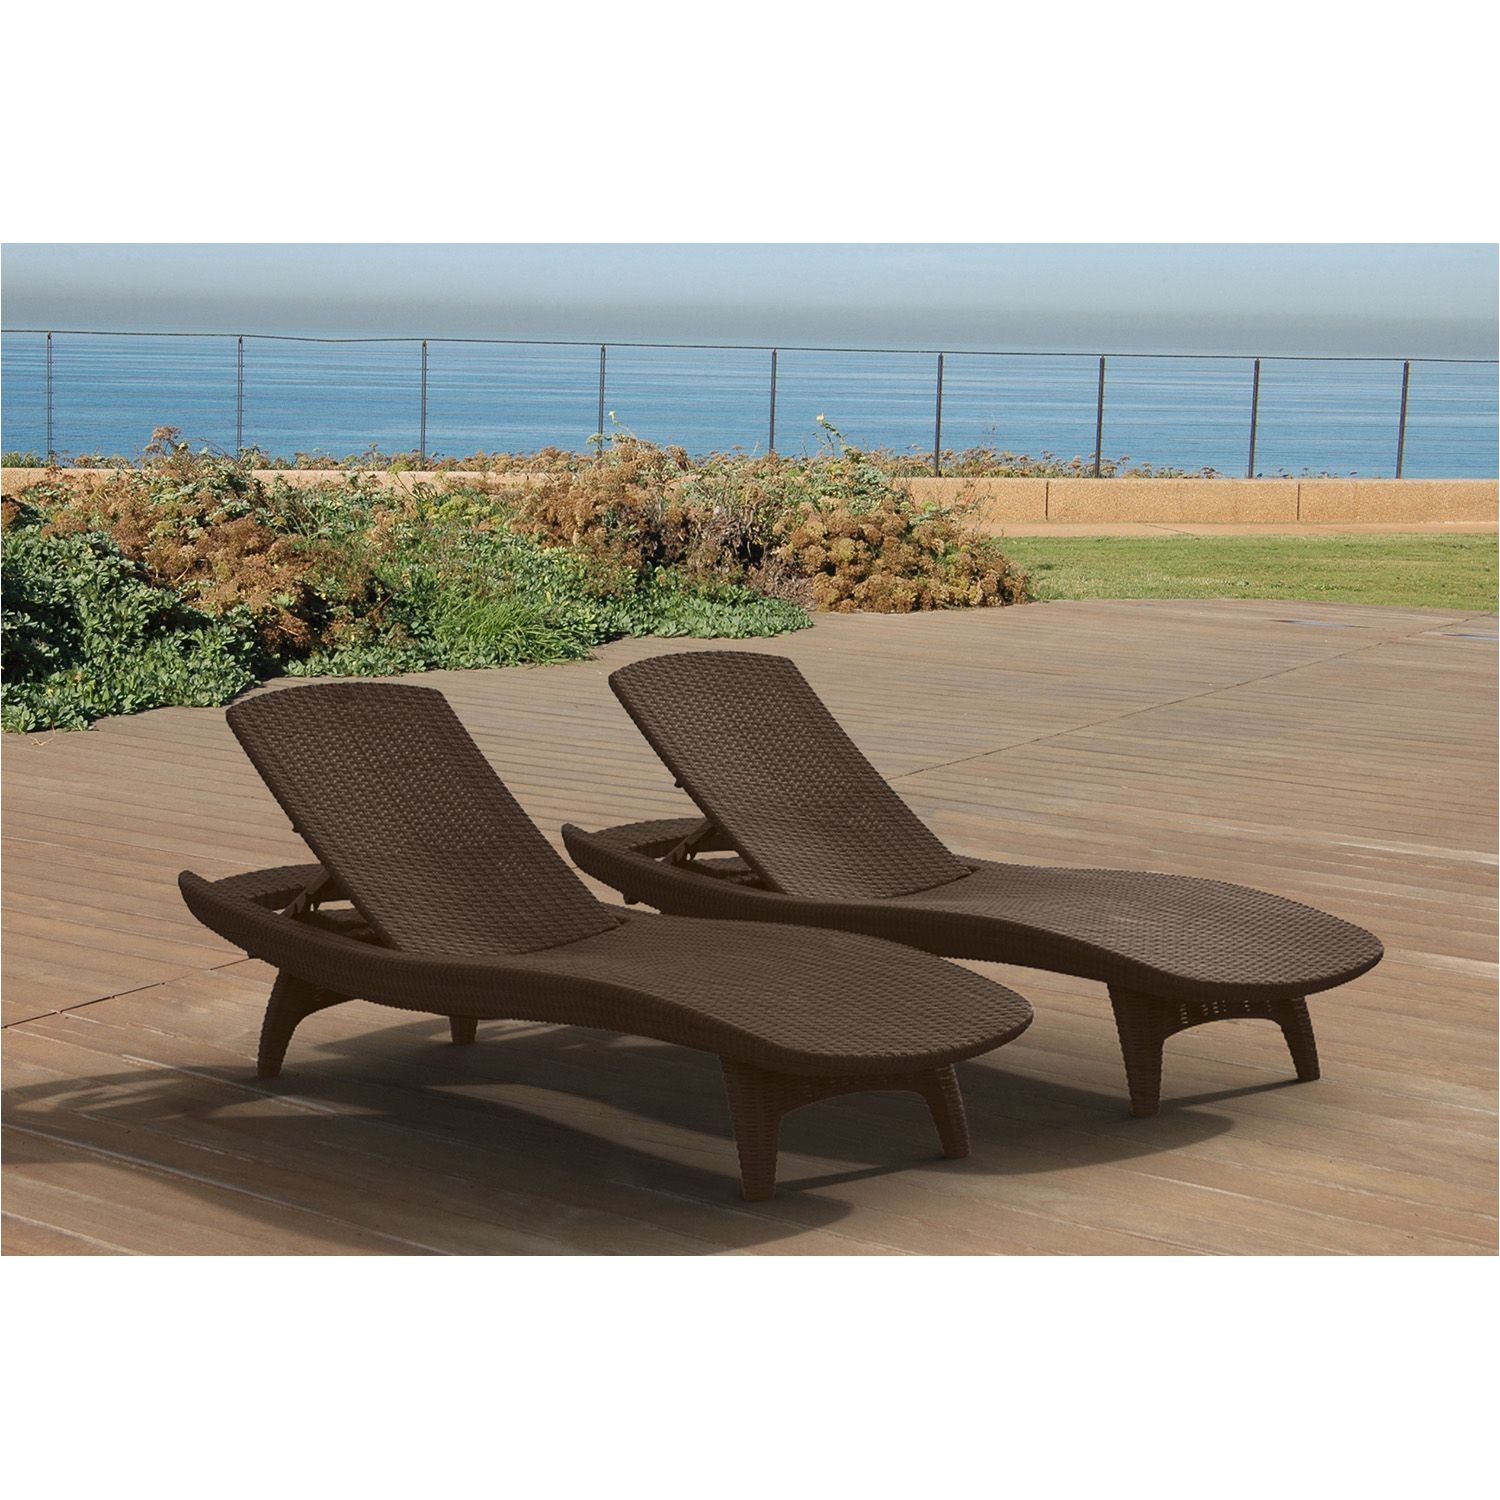 Sams Club Folding Lounge Chairs Keter 2 Pack All Weather Rattan Chaise Lounger Various Colors